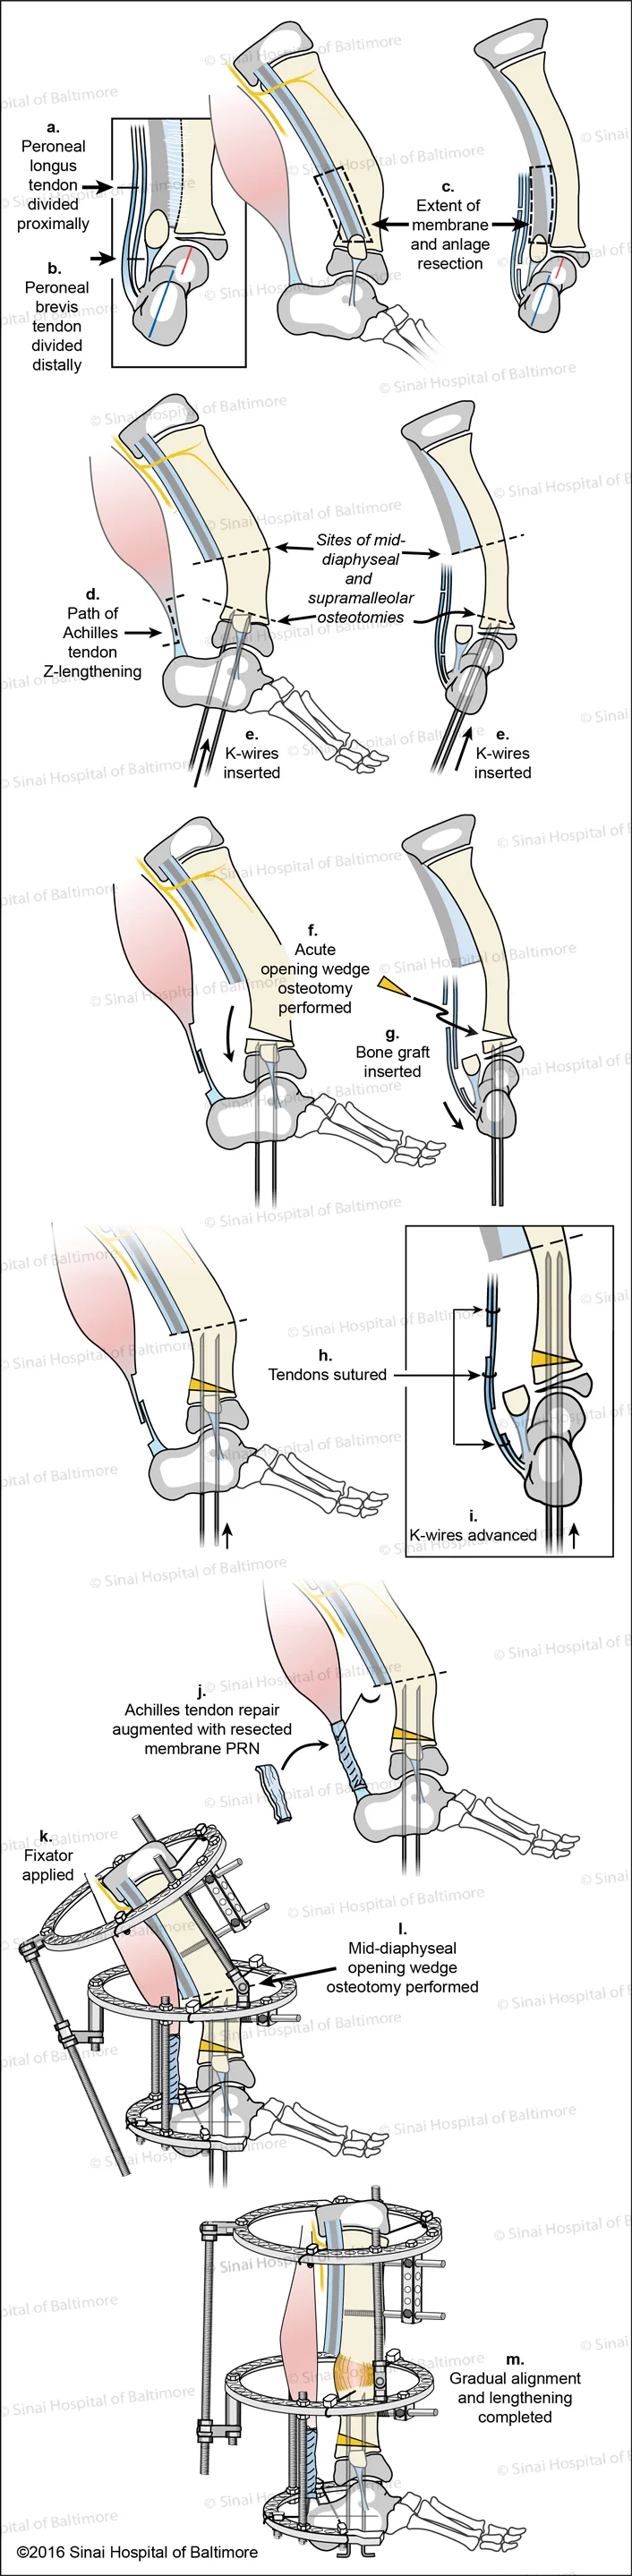 SUPERankle Surgical Technique for Supramalleolar Type Fibular Hemimelia (Paley Type 3A - ankle type ) Fig. A, AP View, Peroneal longus tendon is divided proximally. B, AP View, Peroneal brevis tendon is divided distally. C, Lateral and AP views, The extent of the membrane and anlage resection is identified; D, E, AP and Lateral views, Path of Achilles tendon Z-lengthening, sites of mid-diaphyseal and supramalleolar osteotomies are identified, k-wires are inserted; F, Acute opening wedge osteotomy performed; G, Bone graft is inserted; H, Tendons are sutured; I, K-wires are advanced; J, Achilles tendon repair is augmented with resected membrane as needed; K, Fixator is applied; L, Mid-diaphyseal opening wedge osteotomy is performed; M, Gradual alignment and lengthening is completed.